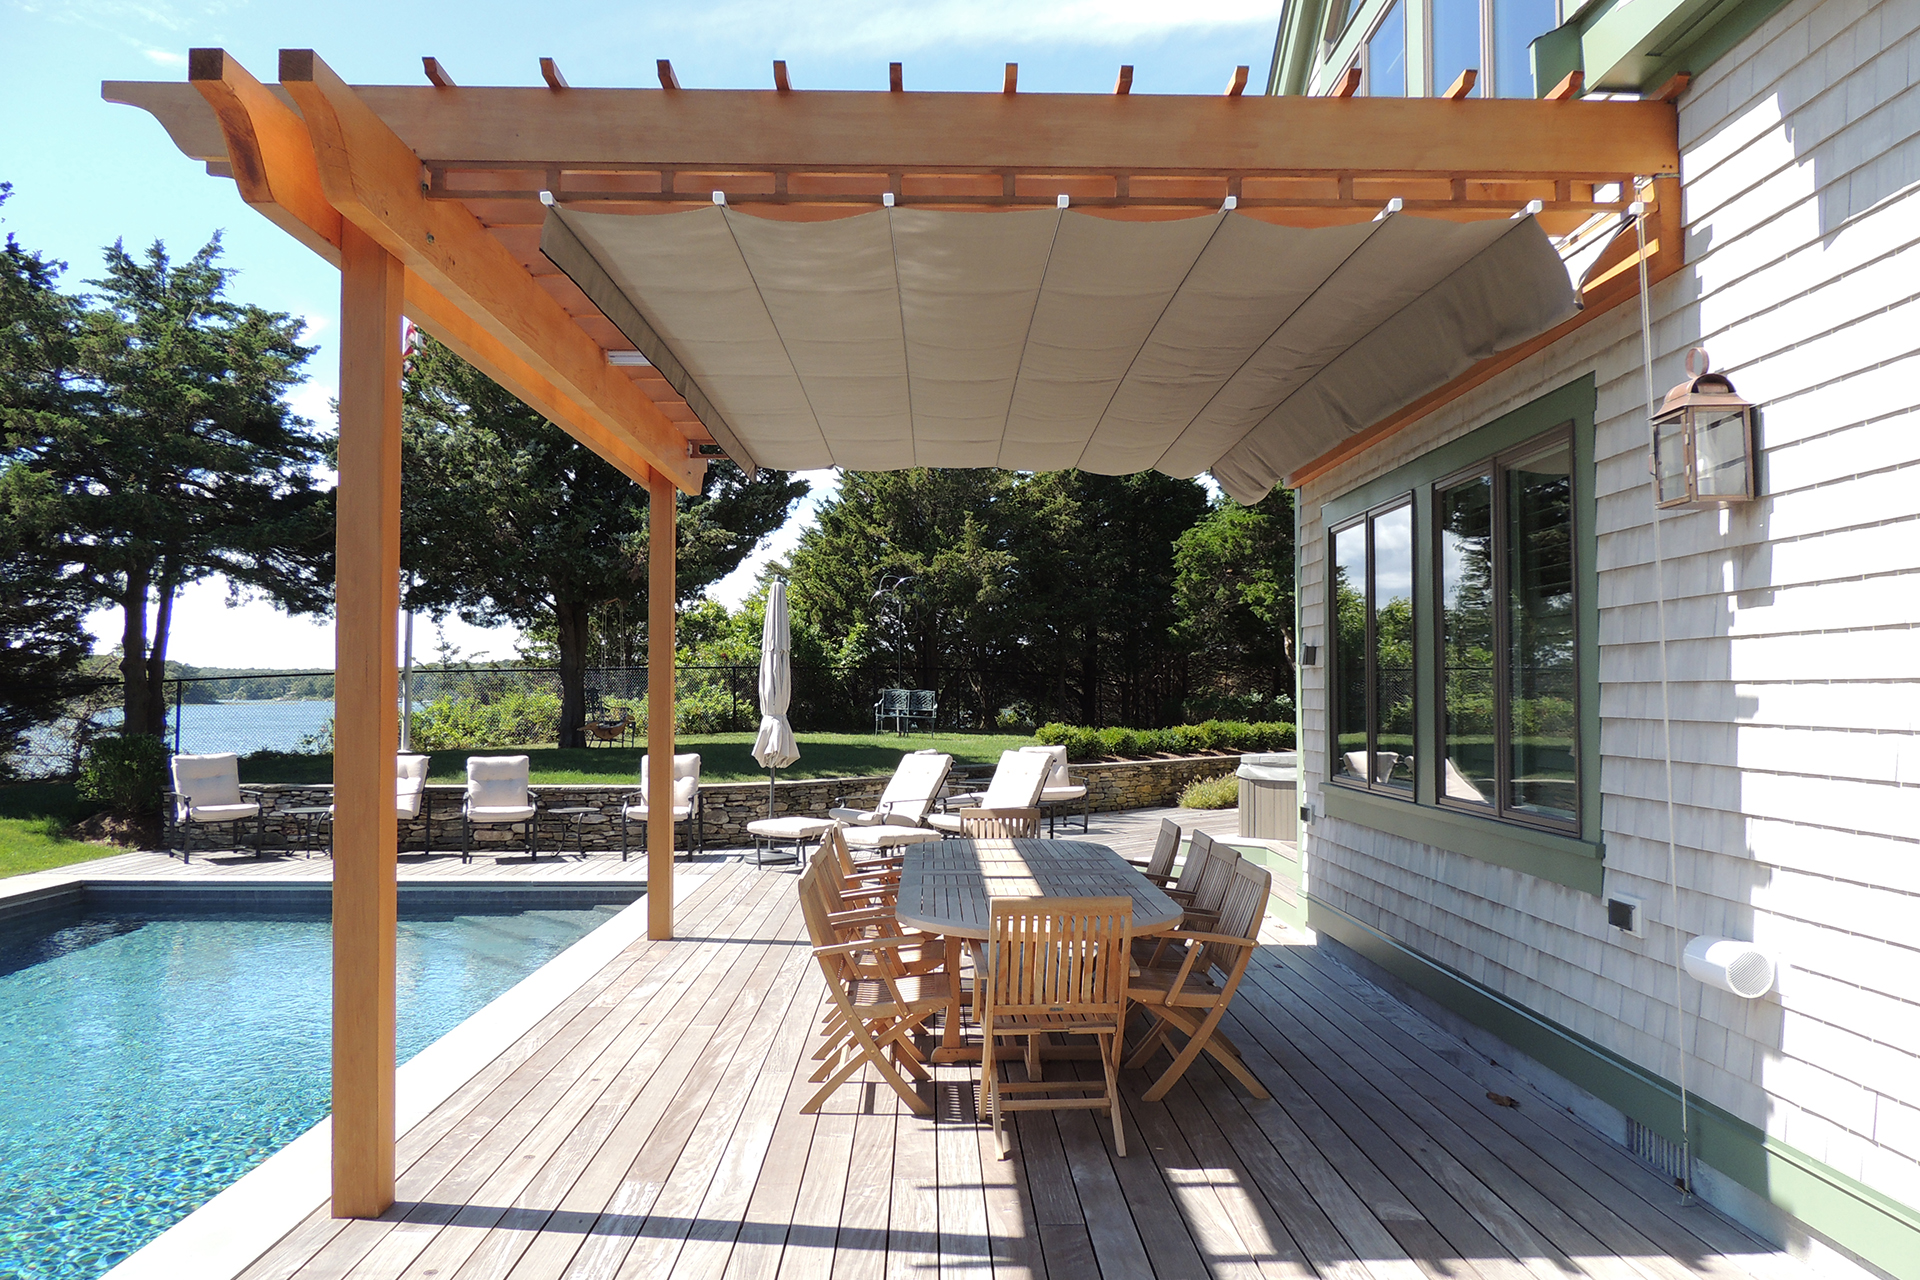 attached wooden pergola and retractable canopy over an outdoor dining area